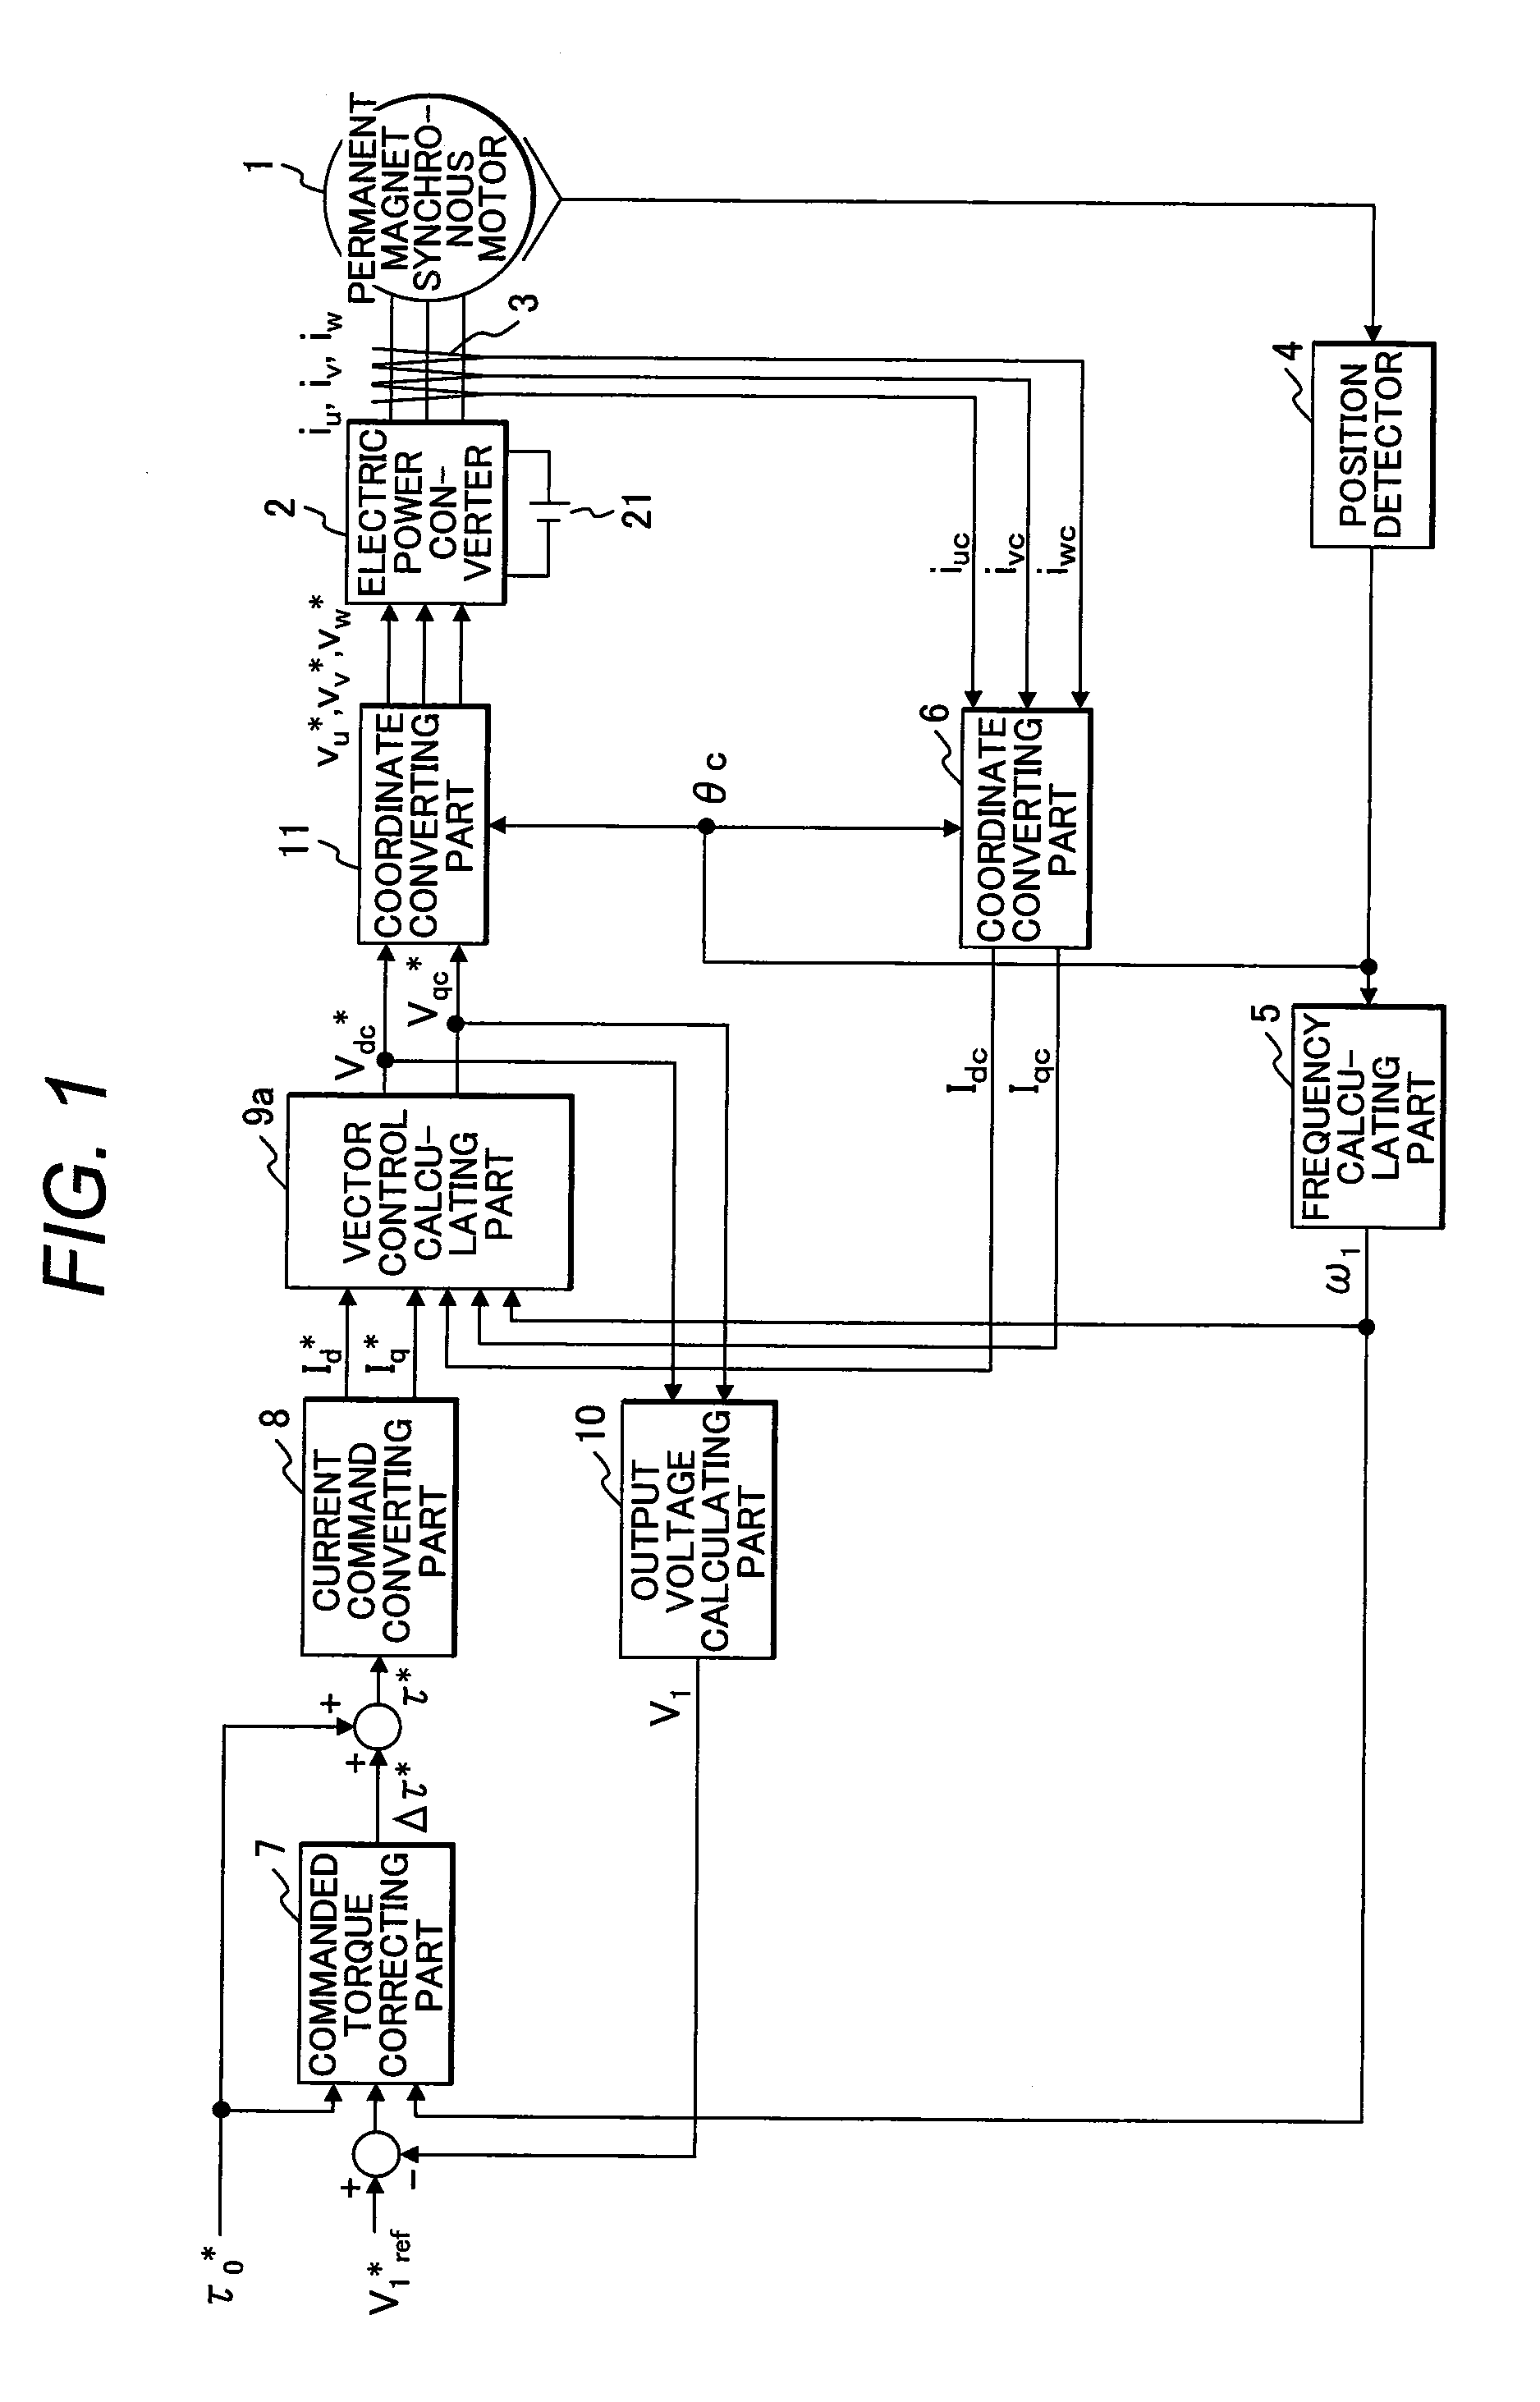 Torque Controller for Permanent Magnet Synchronous Motor